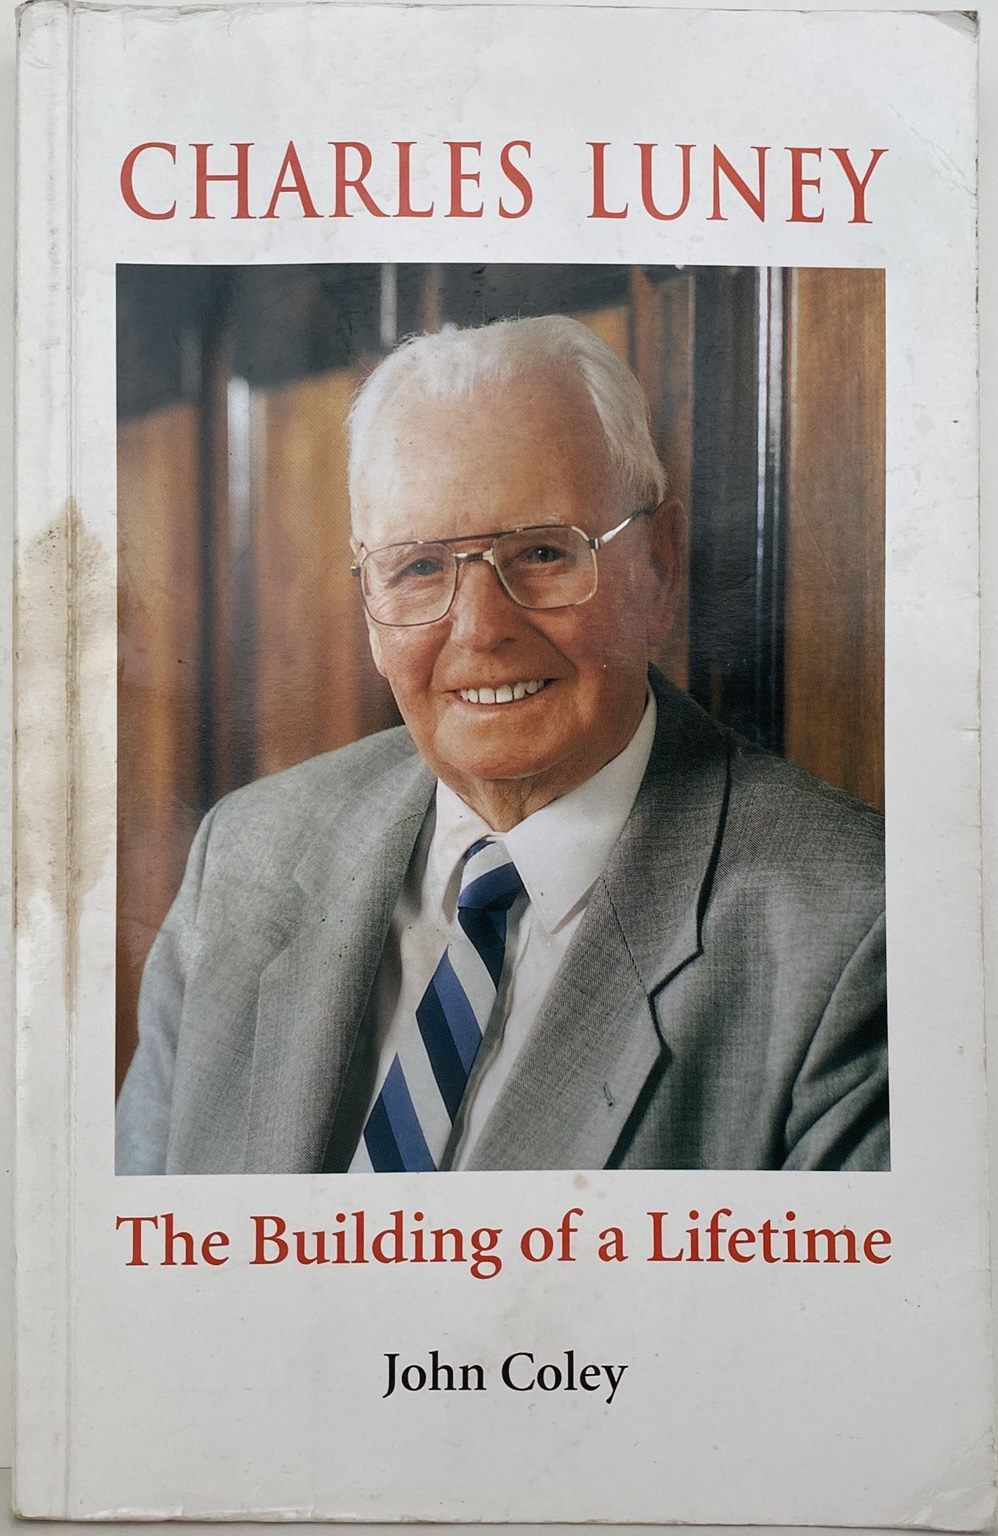 CHARLES LUNEY: The Building of A Lifetime